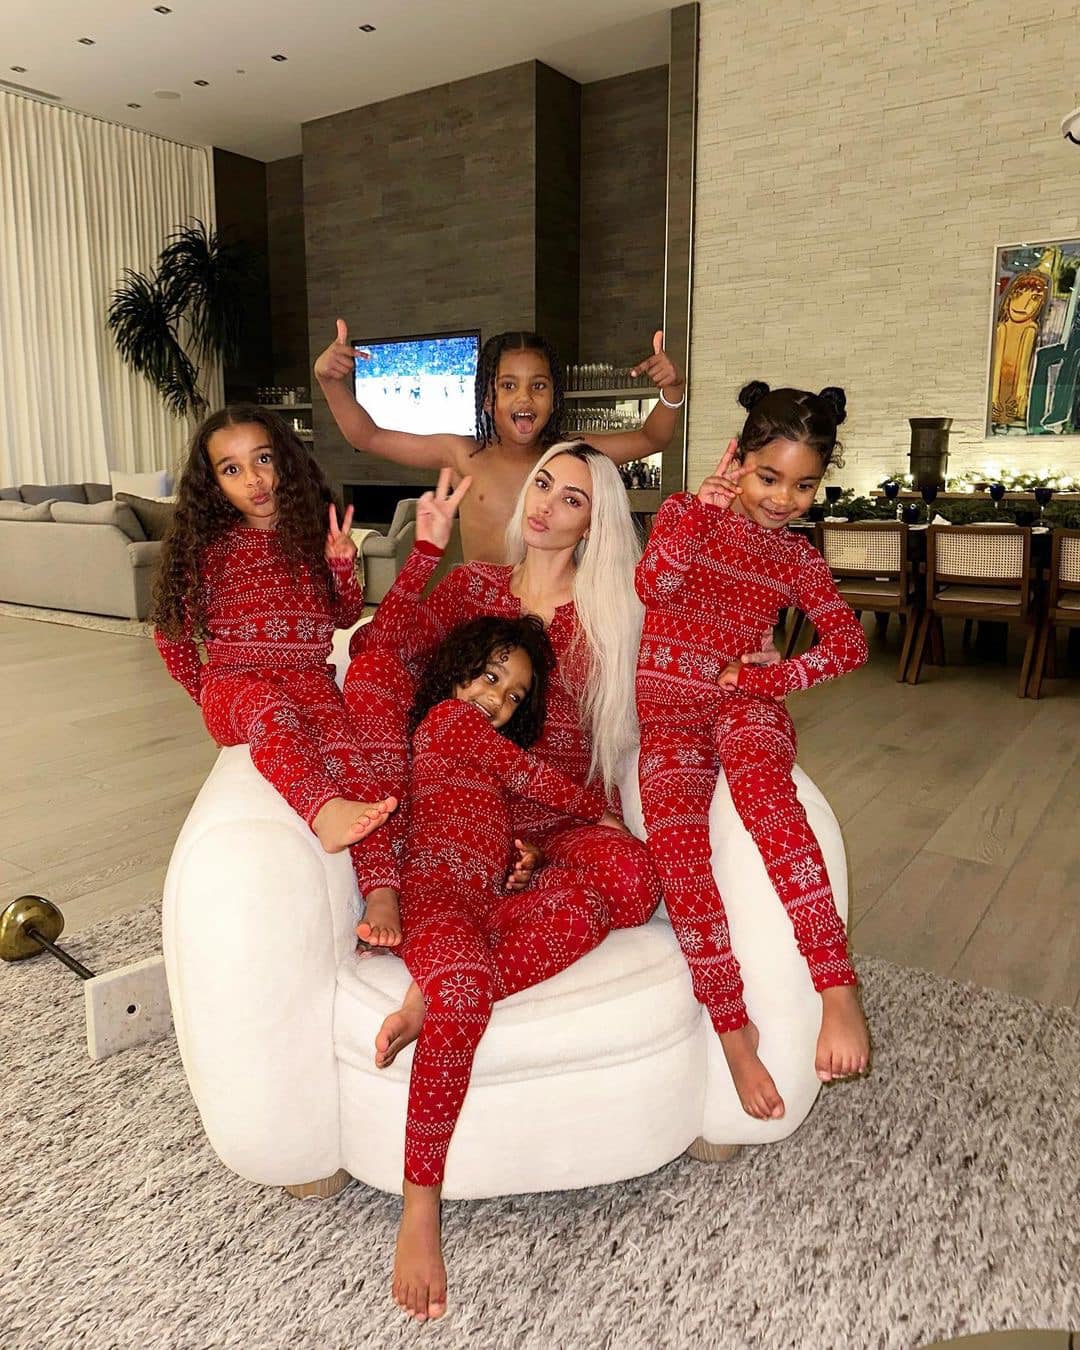 likhoa sweet chicago west next to kim kardashian and her siblings in a family photo set that makes the online community constantly praise 6539def5bcd58 Sweet Chicago West Next To Kim Kardashian And Her Siblings In A Family Photo Set That Makes The Online Community Constantly Praise